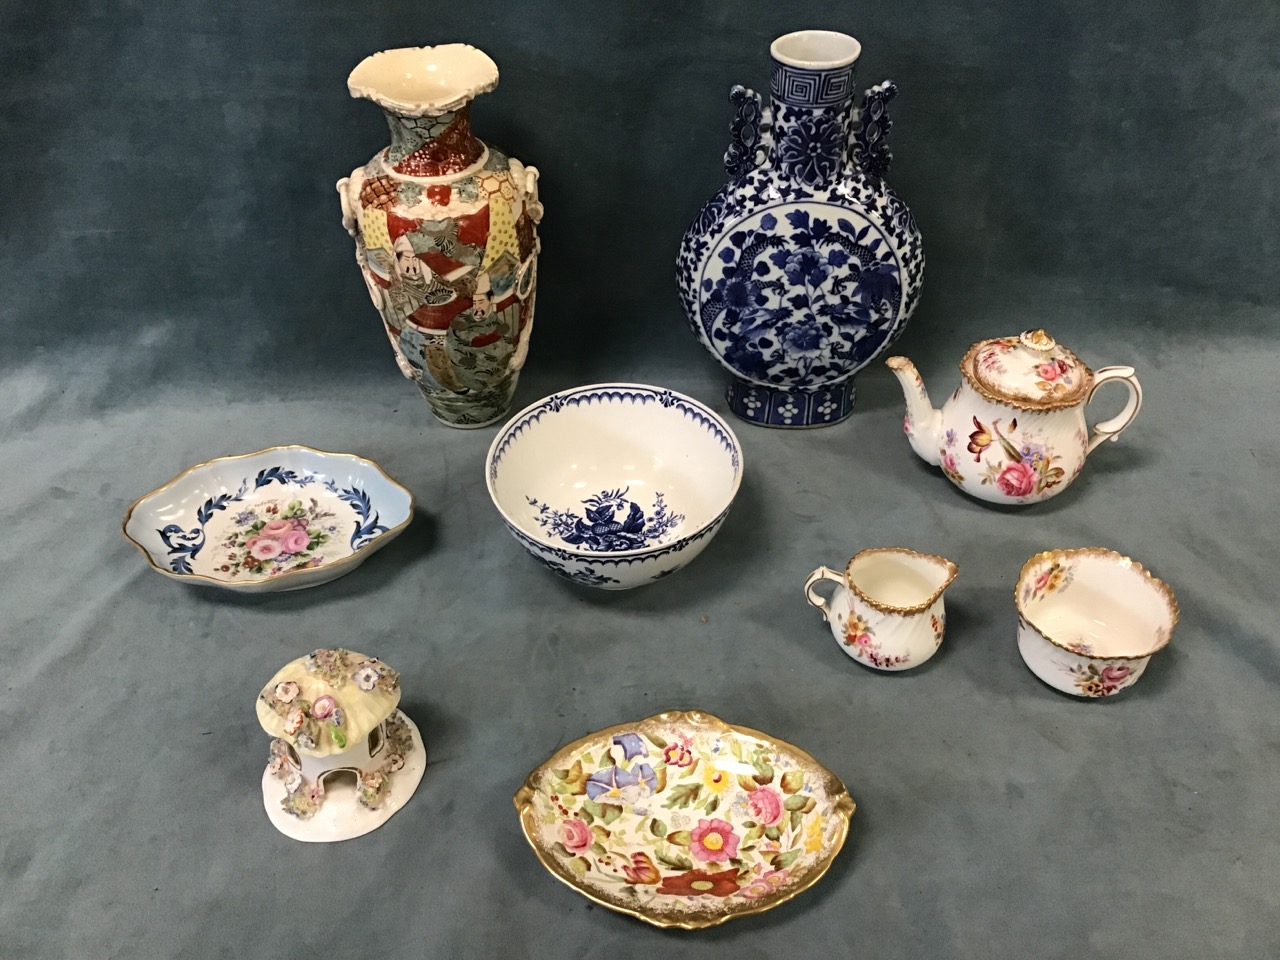 Miscellaneous ceramics including an early blue & white Worcester bowl, a Satsuma vase, a Limoges